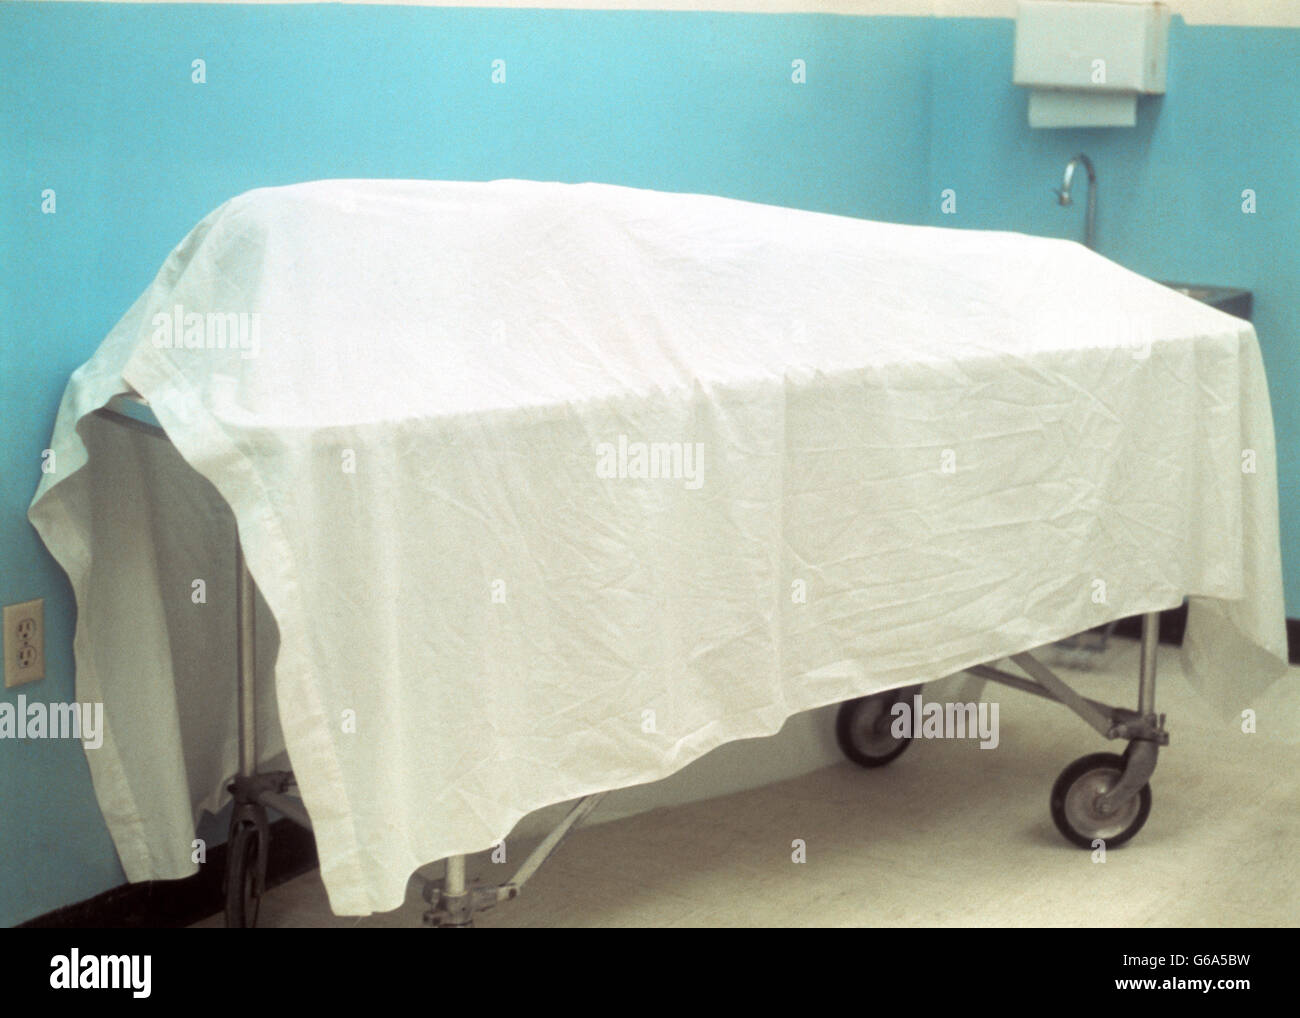 SHEET DRAPED OVER DEAD BODY ON GURNEY IN MORGUE Stock Photo